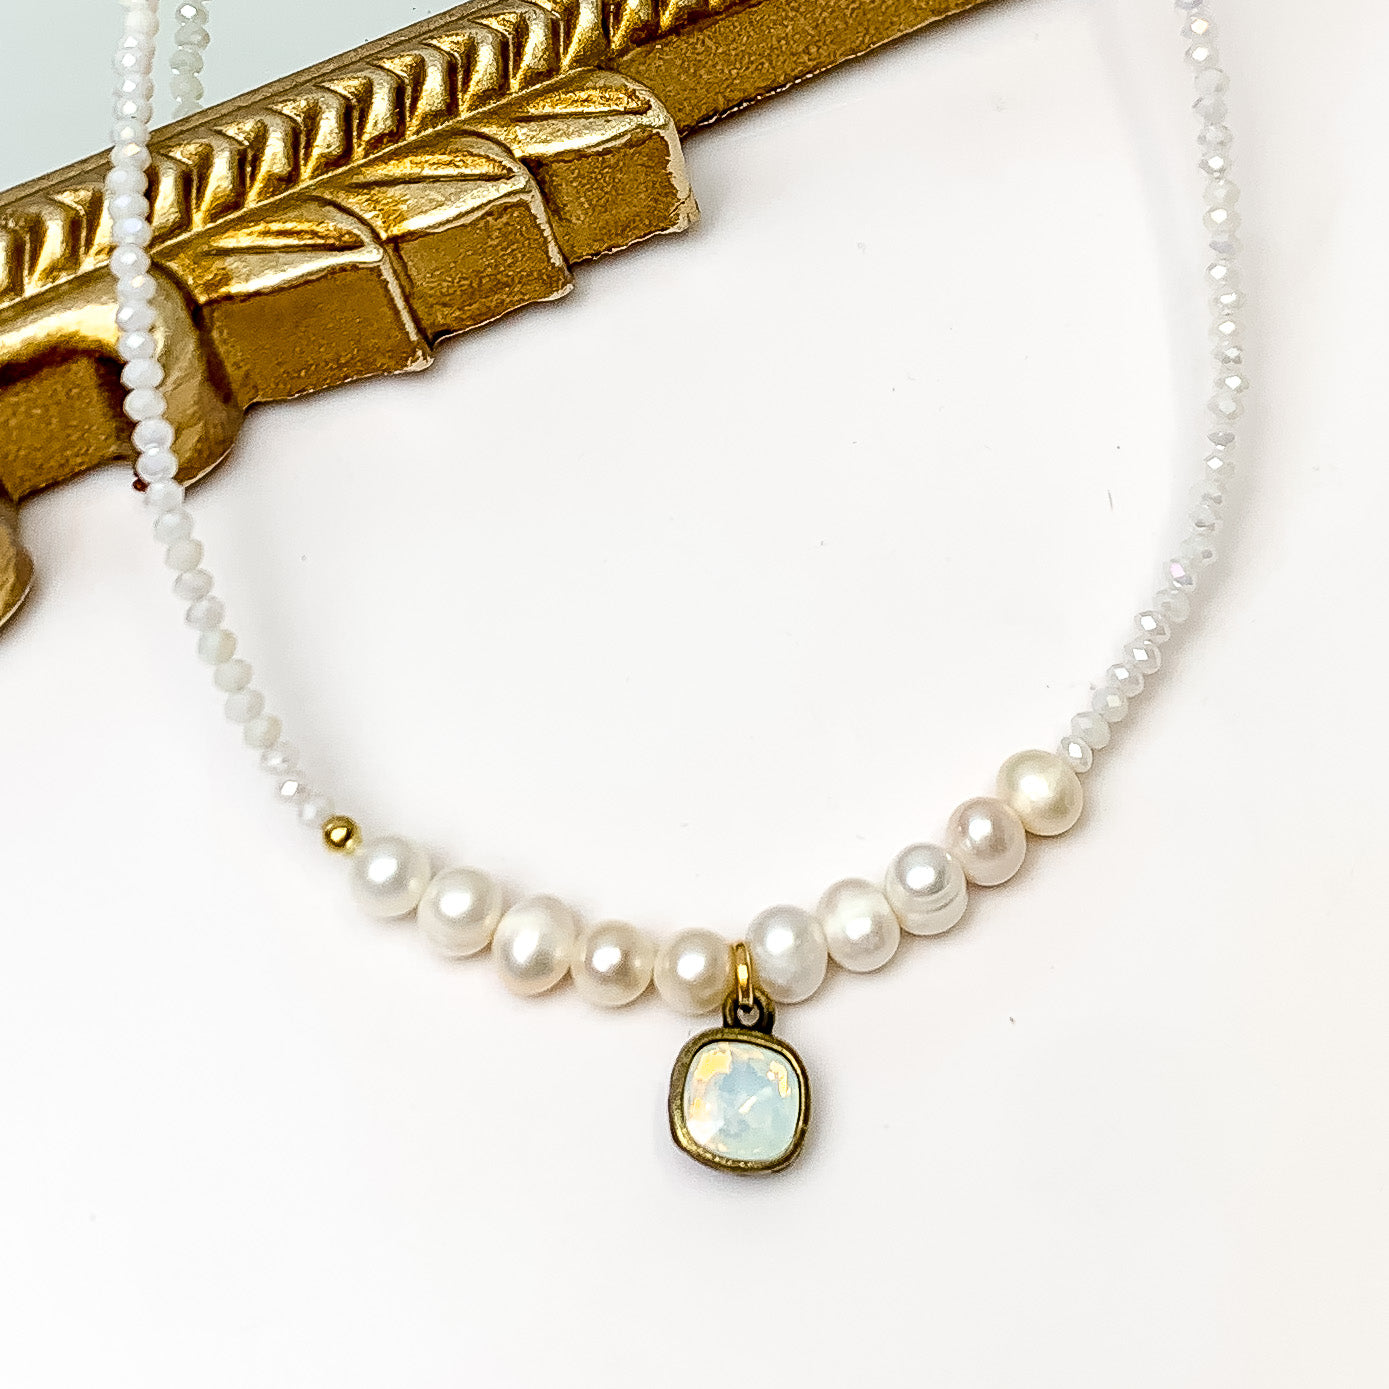 Pink Panache White Crystal and Pearl Beaded Necklace With Bronze/ White Opal Cushion Cut. Pictured on a white background with the top of the necklace against a mirror with a gold frame.